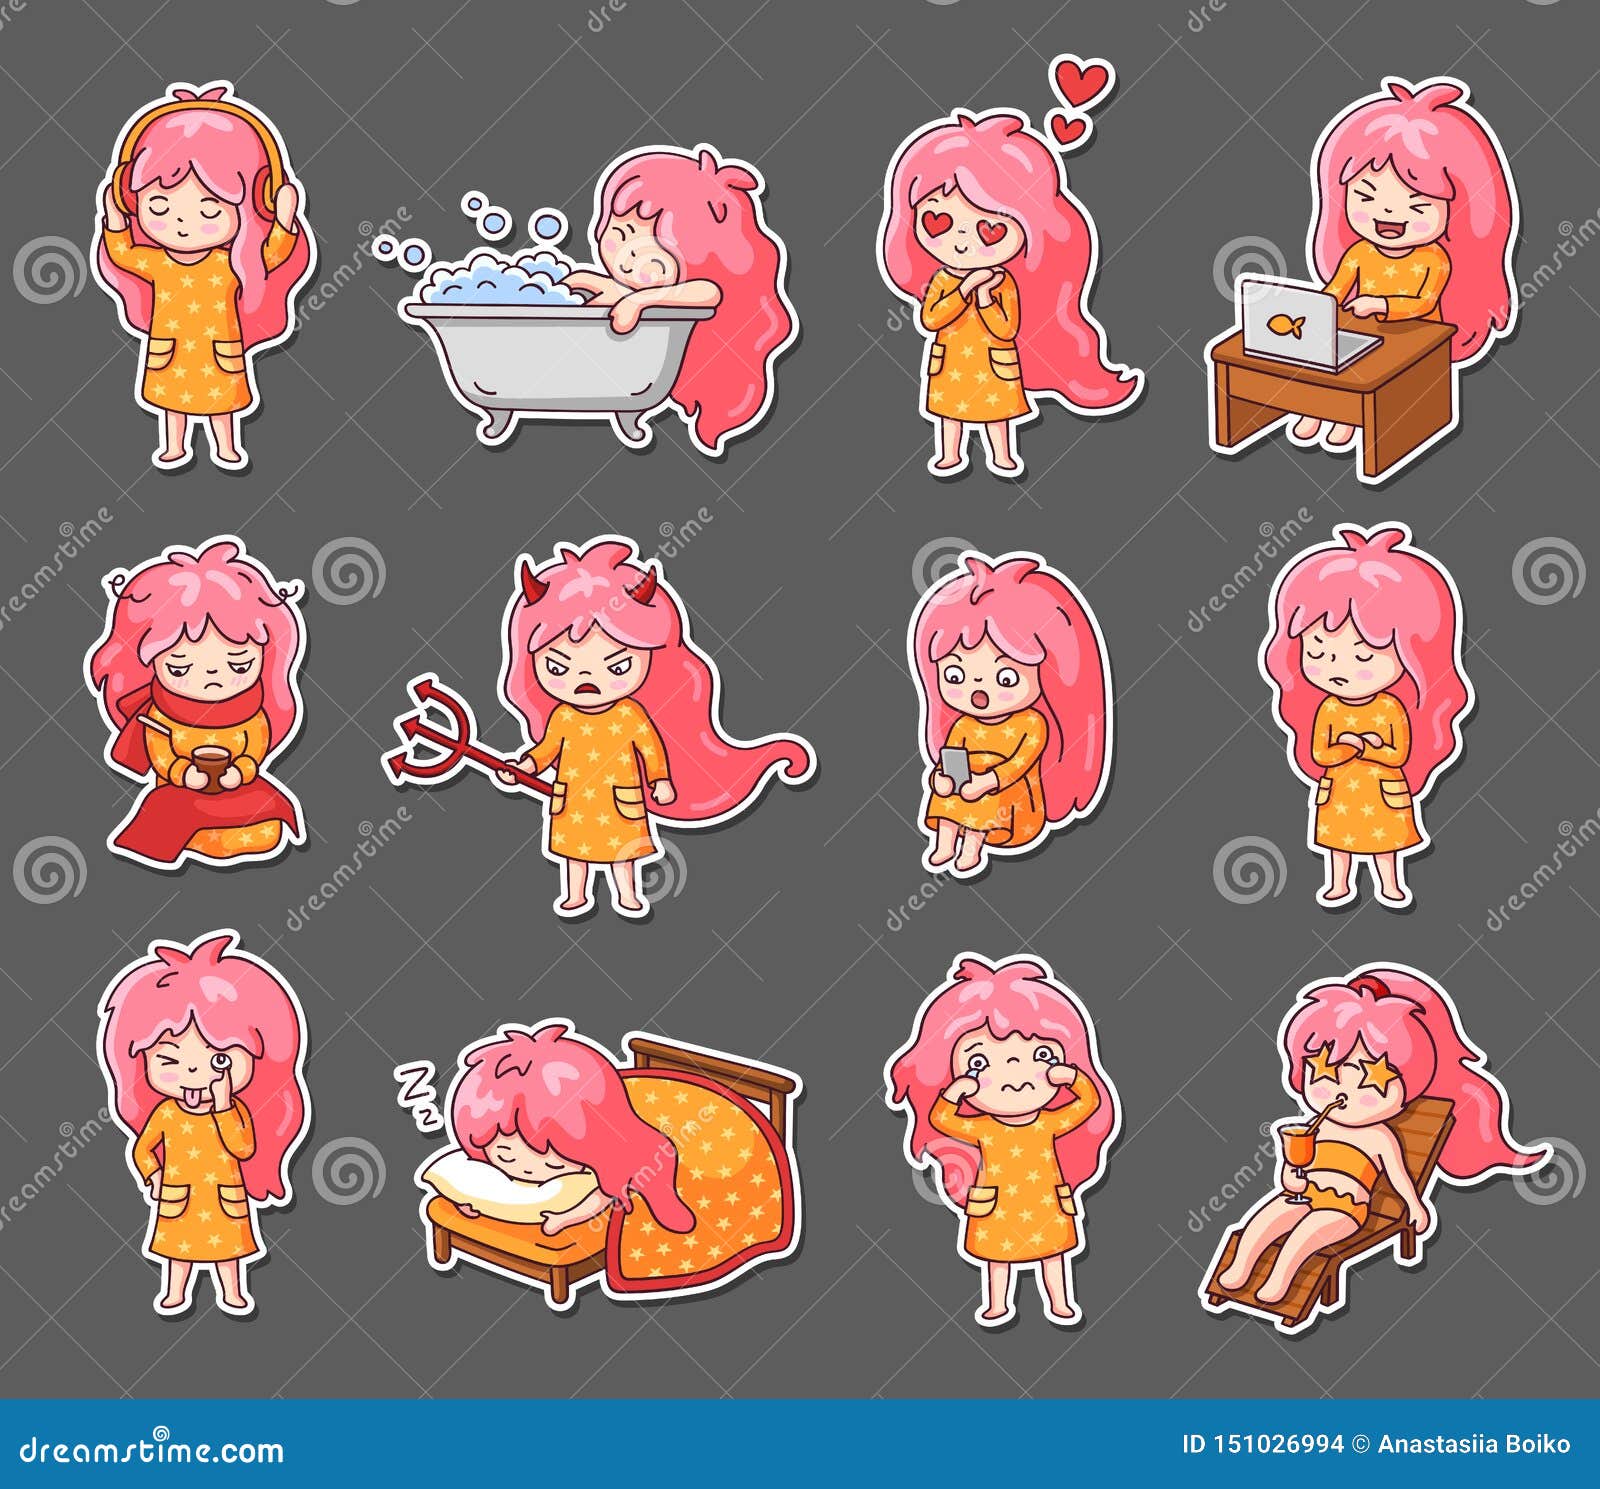 Anime Girls Avatars. Asian Teenage Cute Woman Kawaii with Face Expressions  and Activities in Various Clothes, Profile Stock Vector - Illustration of  avatar, funny: 197475431